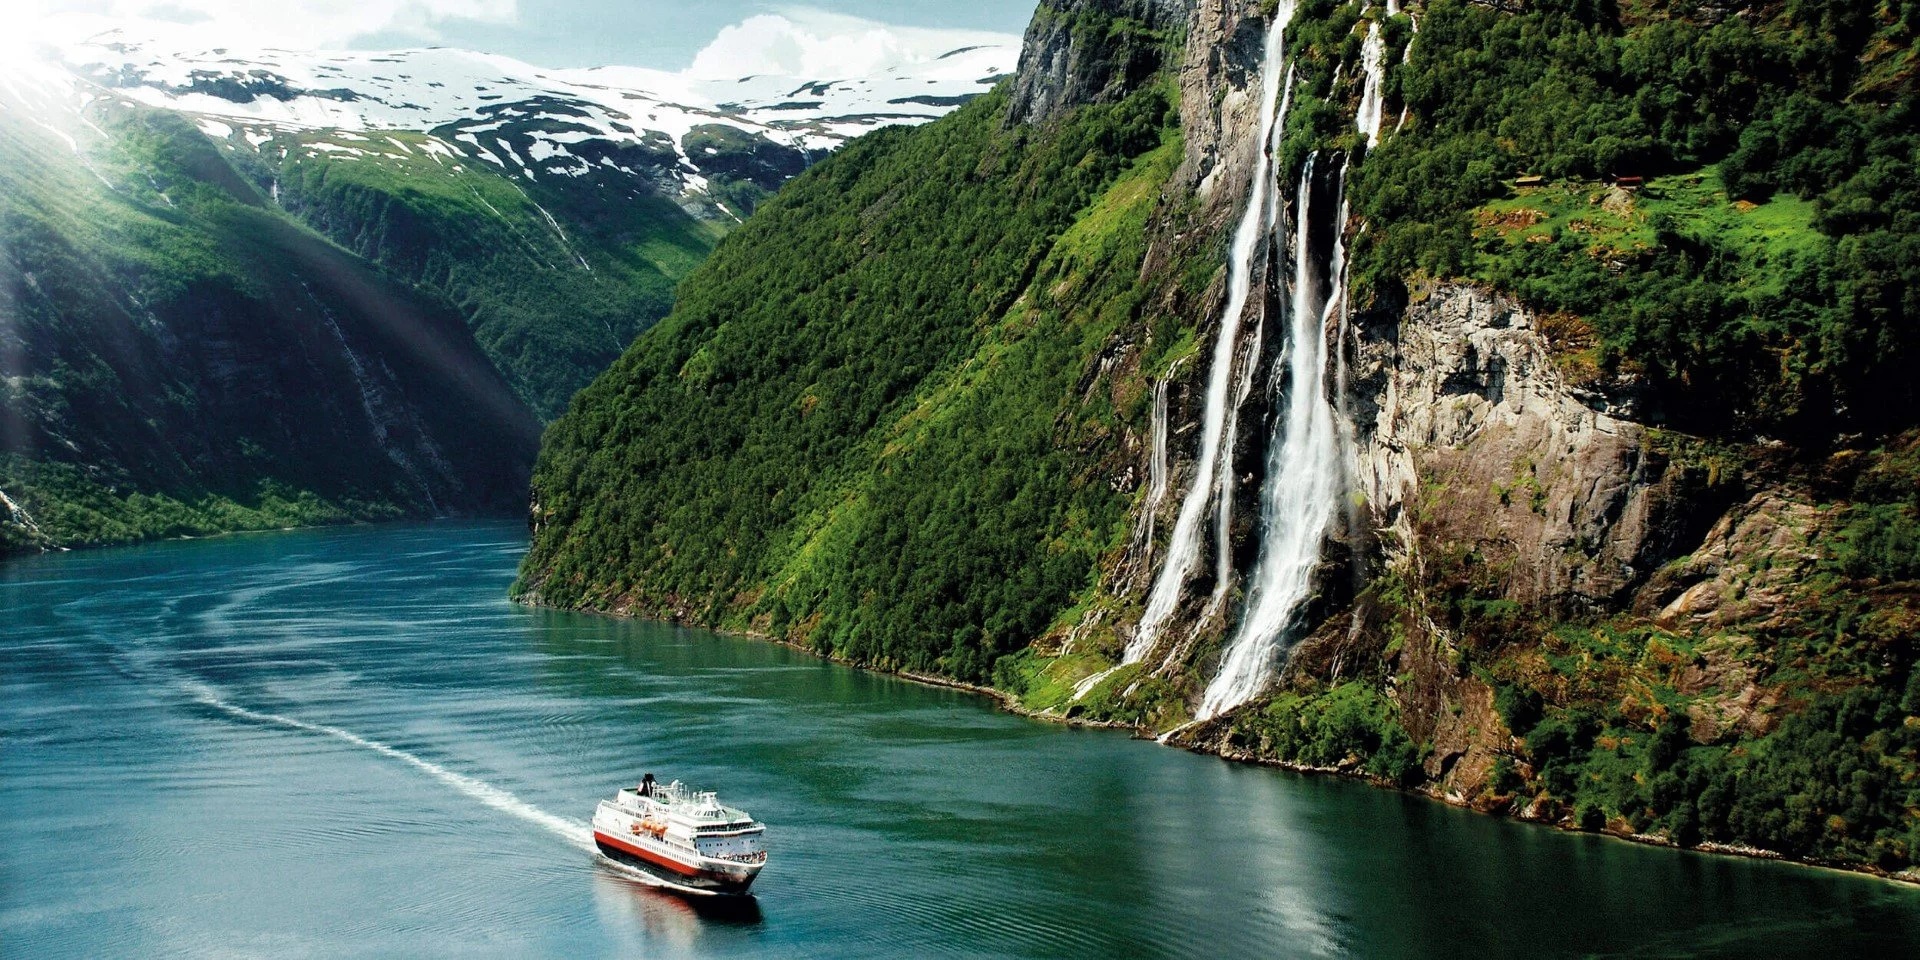 Discover some of the world's most beautiful scenery at Geirangerfjord